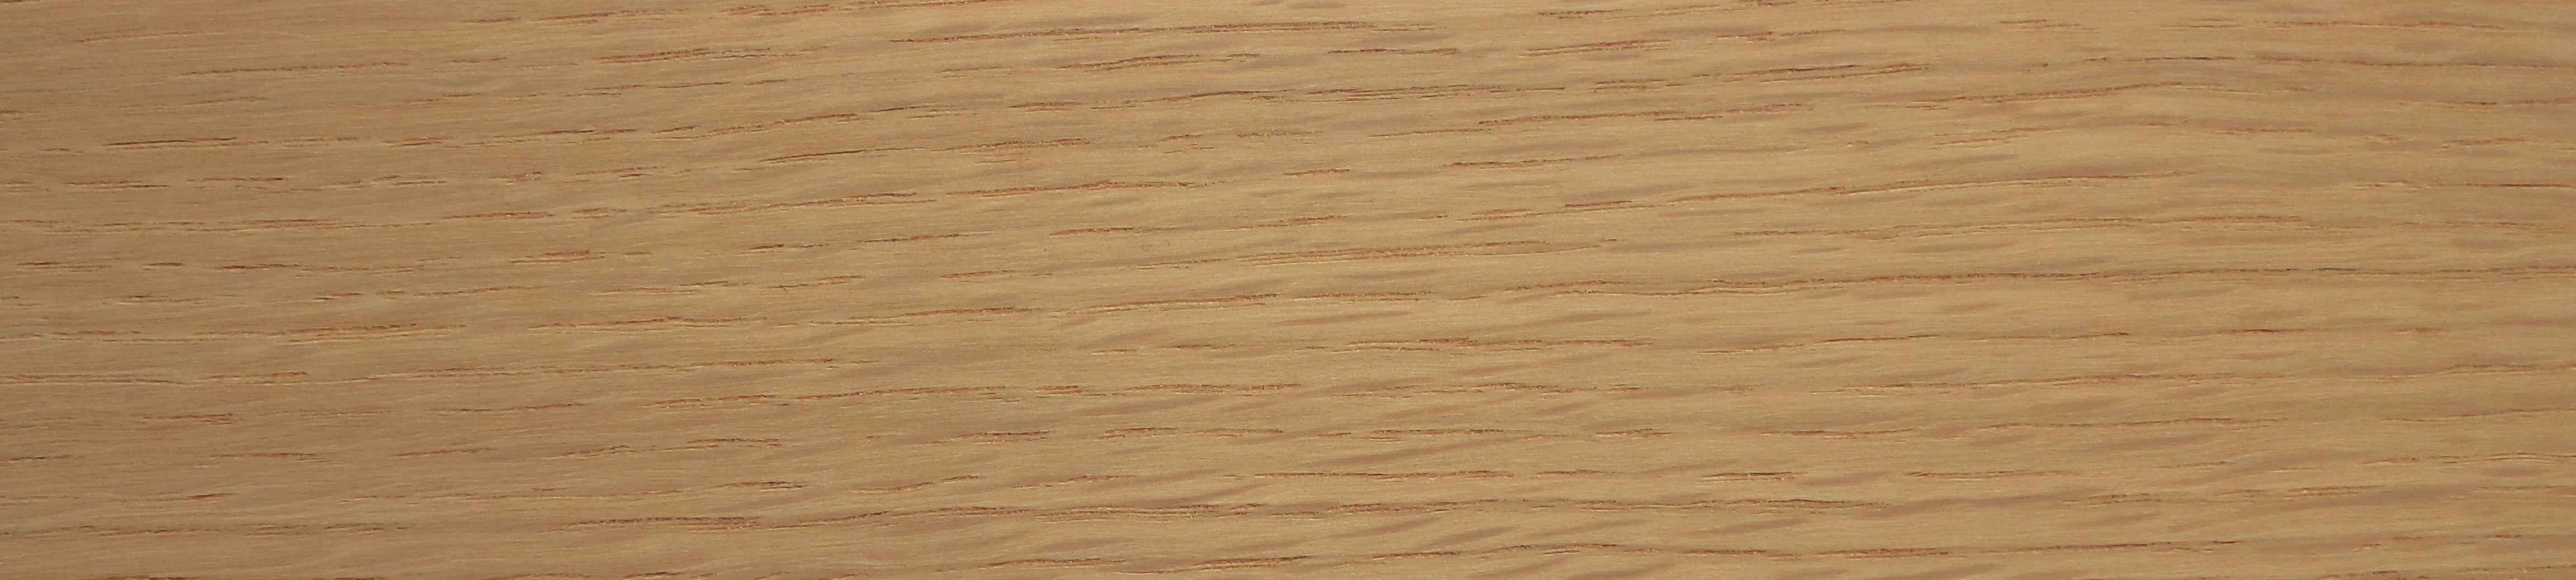 American White Oak Thick wood Pre-glued Edging / Lipping 22mm x 1mm x 100 Metres - EDGEBANDER OR IRON ON